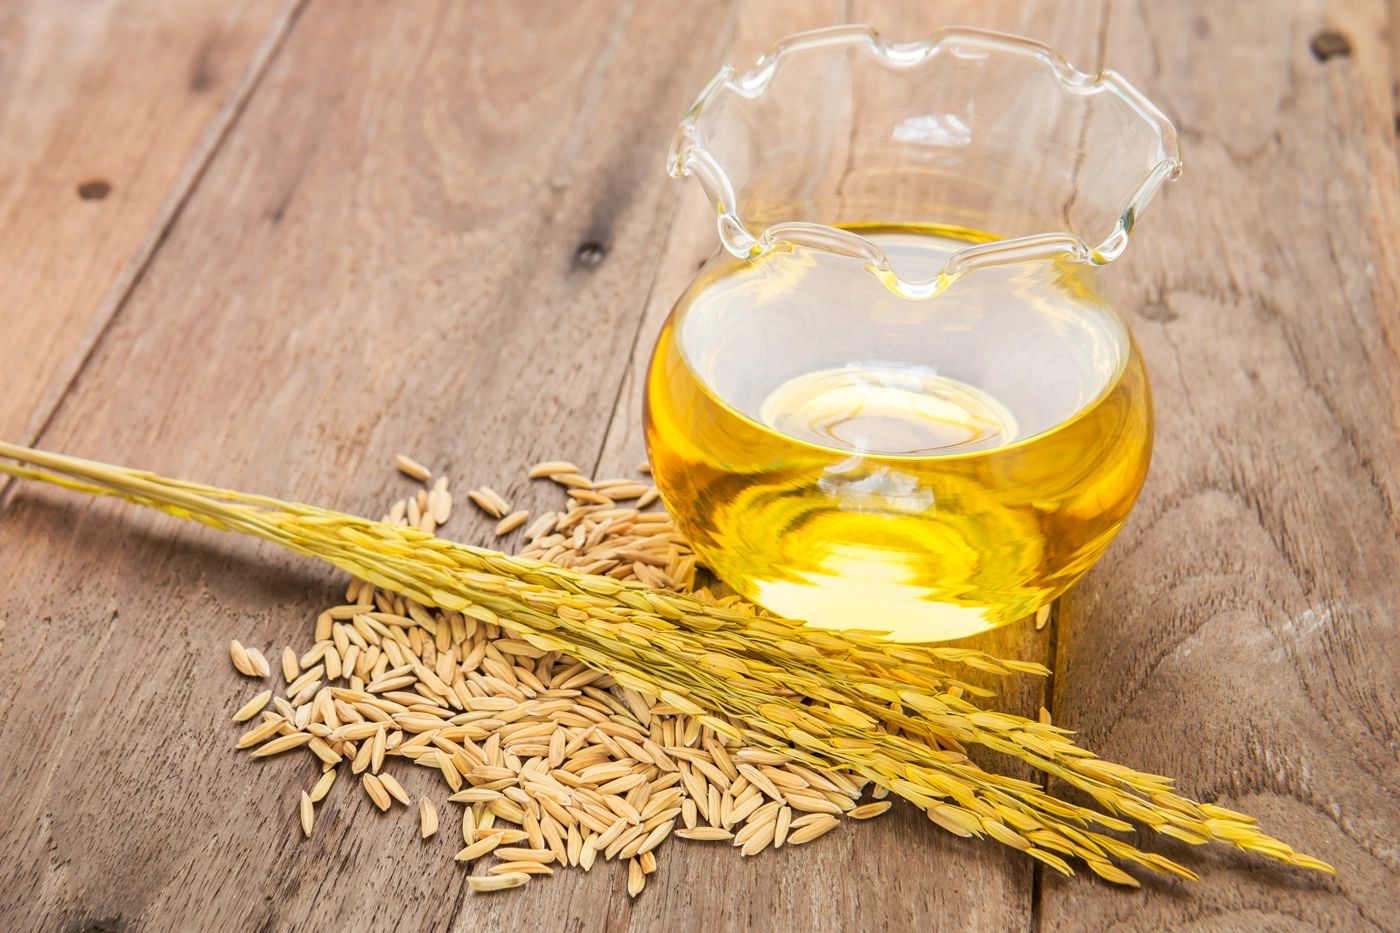 These are the best 4 food oils for you